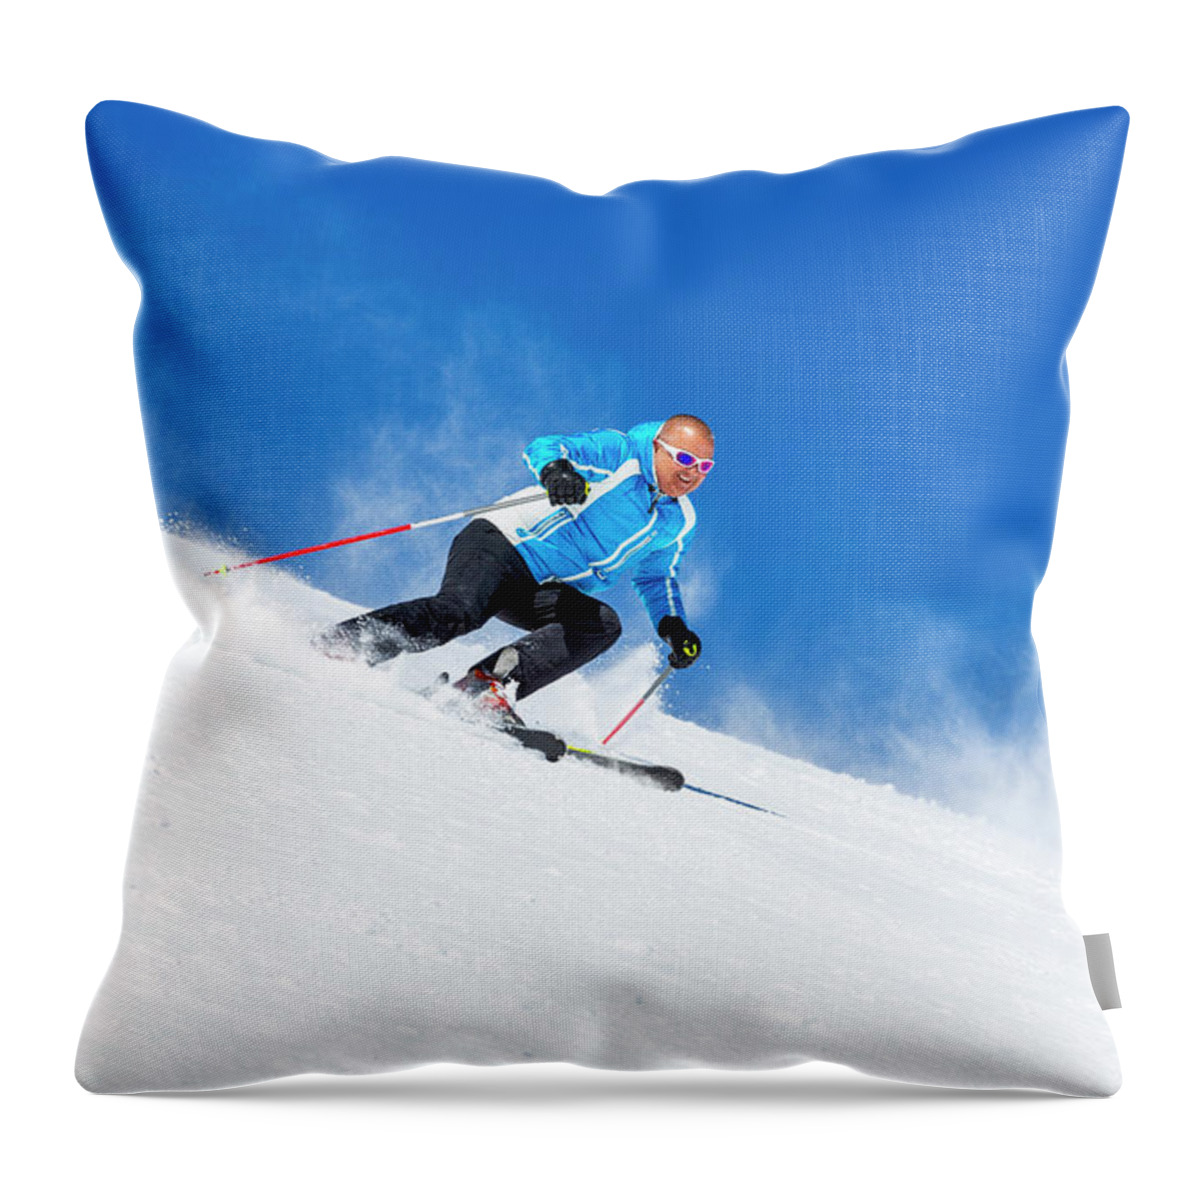 Skiing Throw Pillow featuring the photograph Skiing Carving by Ultramarinfoto